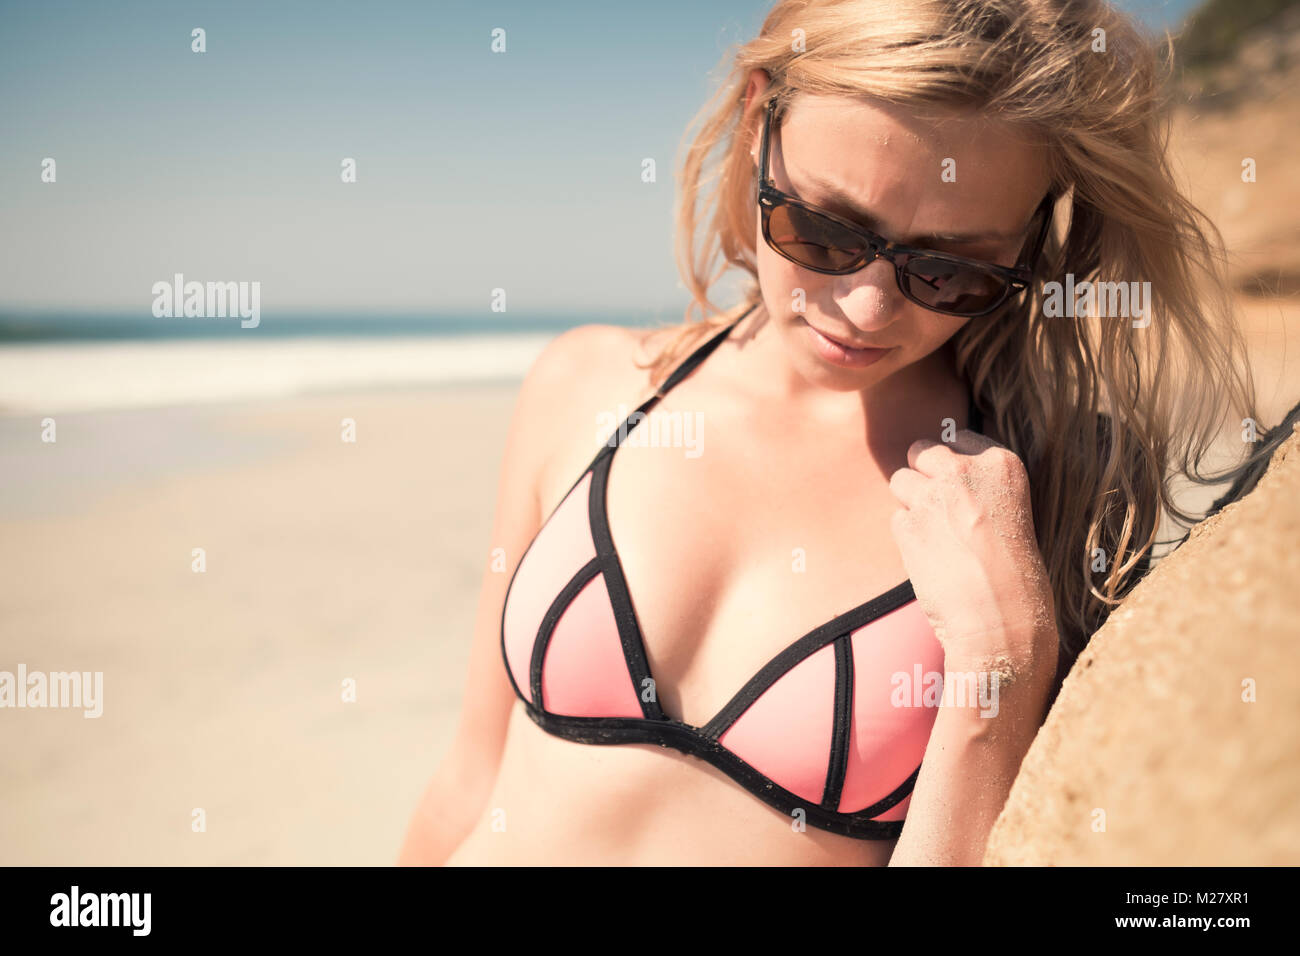 Cose up portrait of young caucasian woman in bikini, wearing sunglasses, leaning against a rock at a beach. Stock Photo